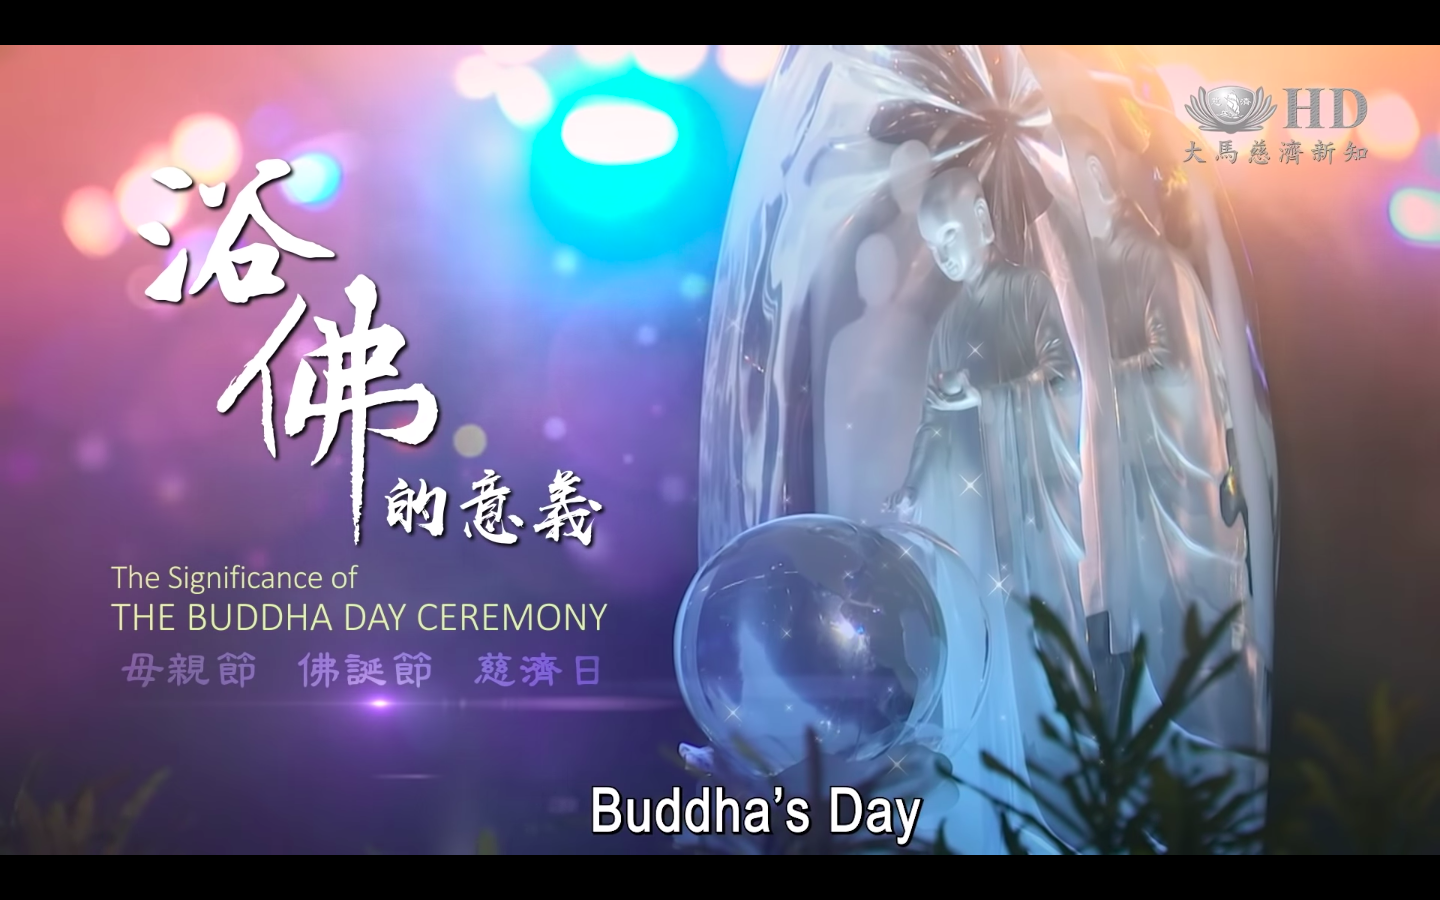 The significance of The Buddha Day Ceremony